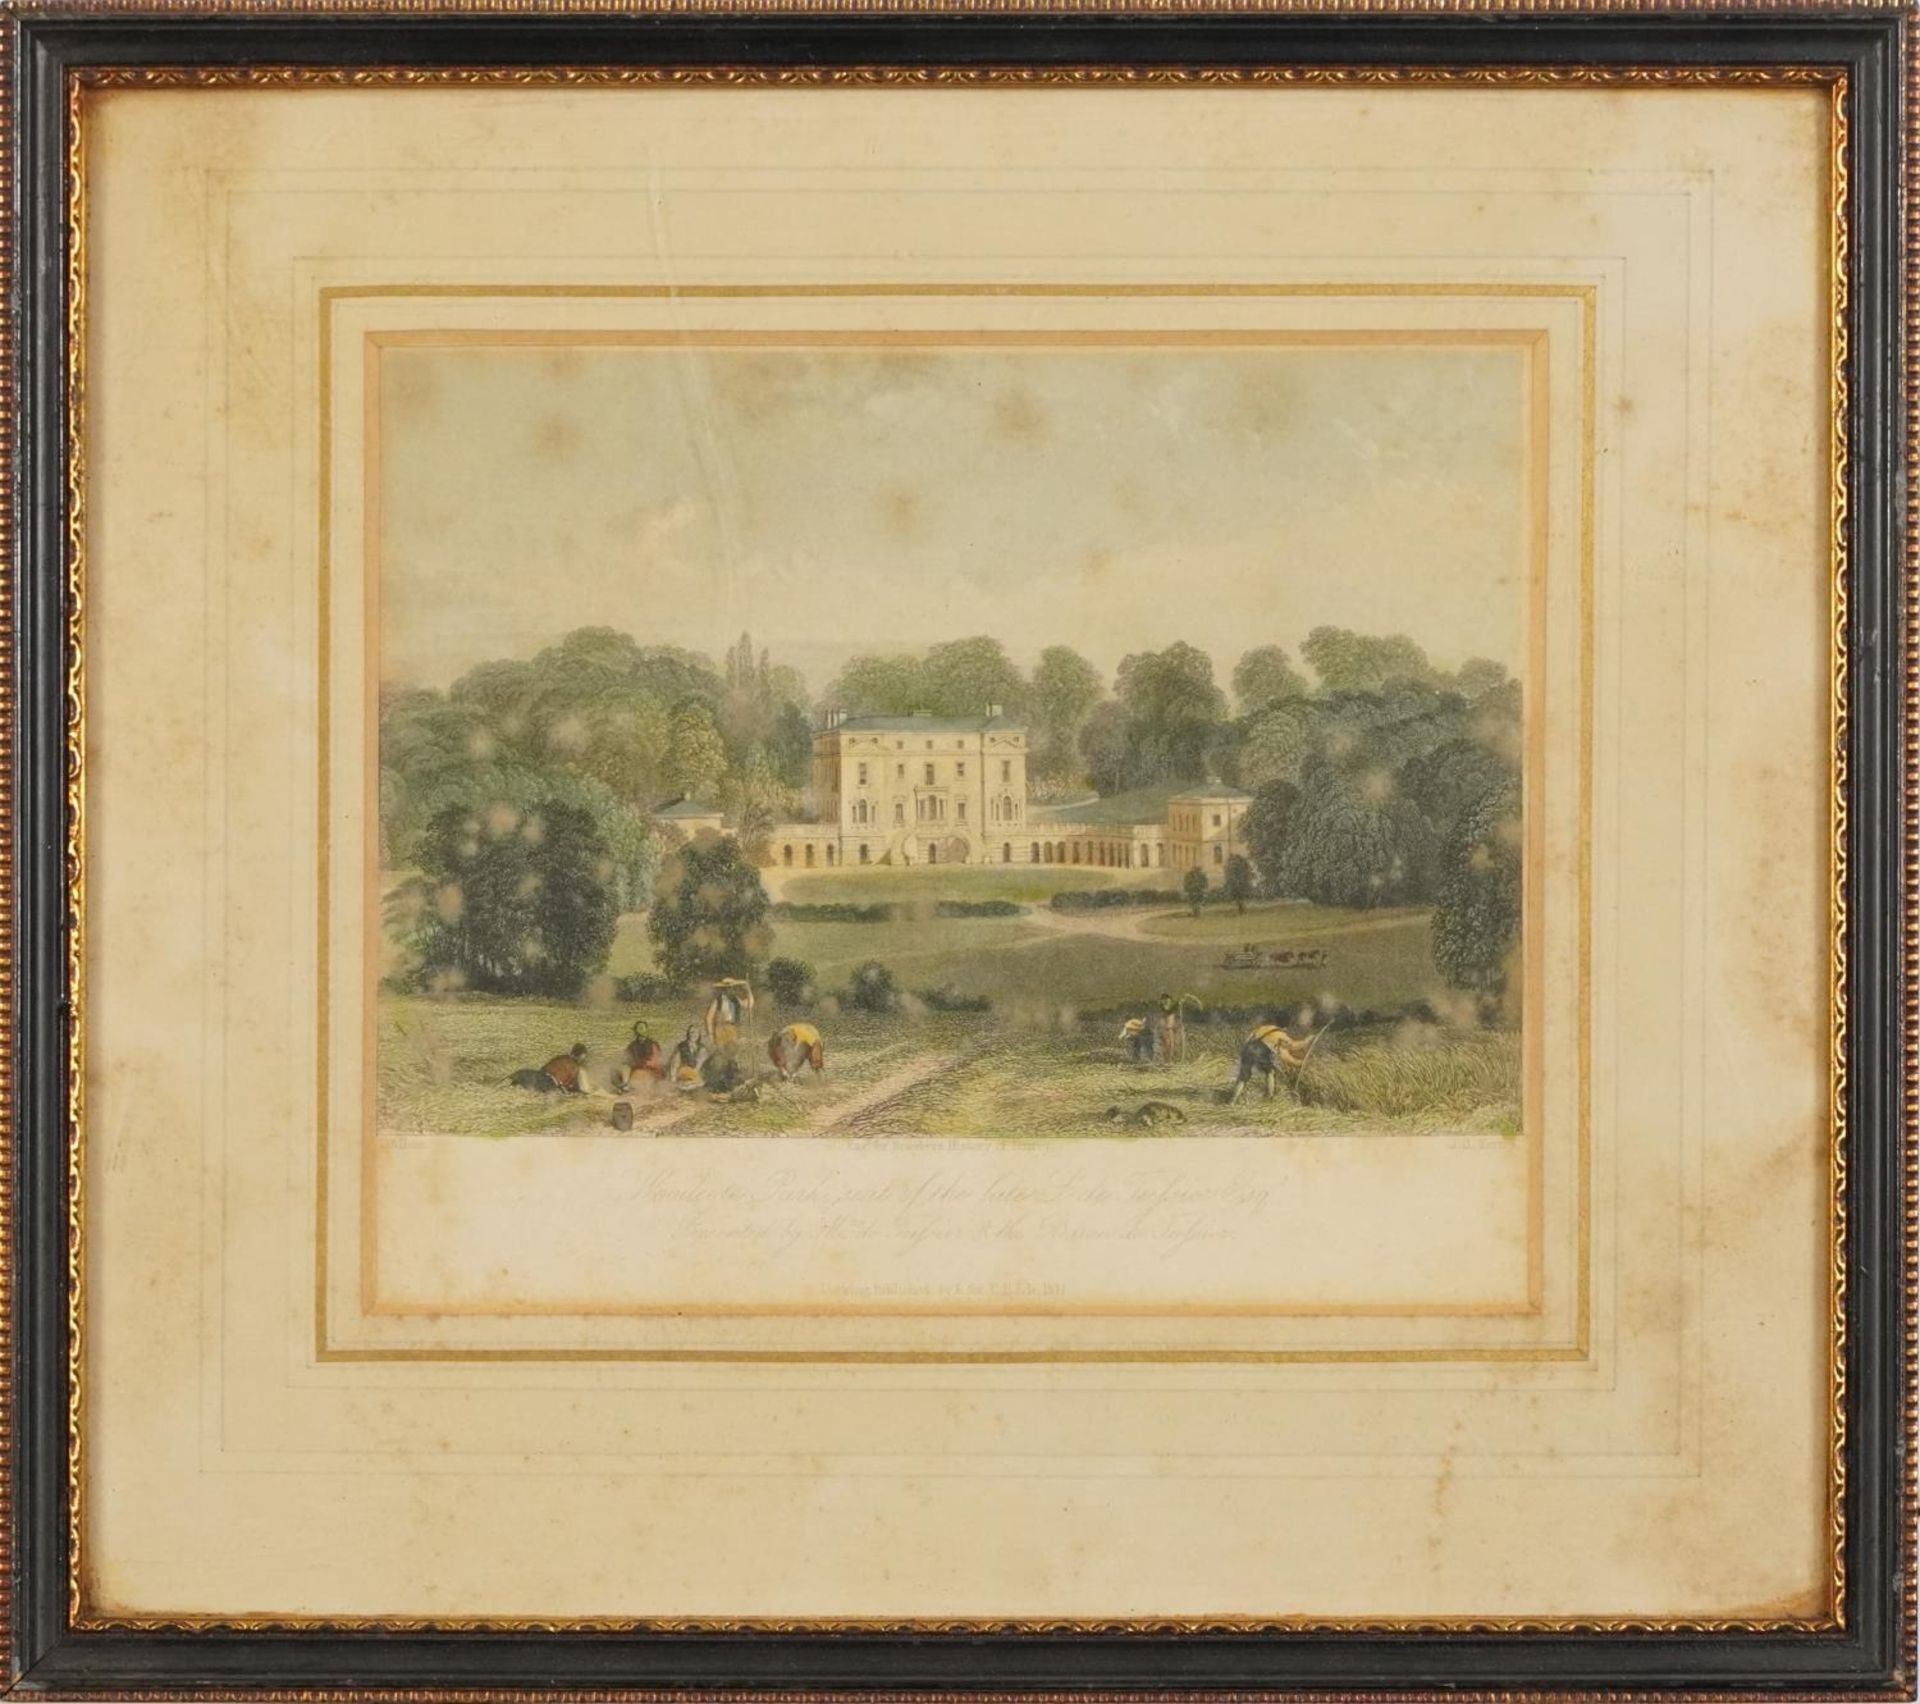 Epsom Races on Derby Day and Woodcote Park, two 19th century engravings, one after Thomas Allom - Image 3 of 9